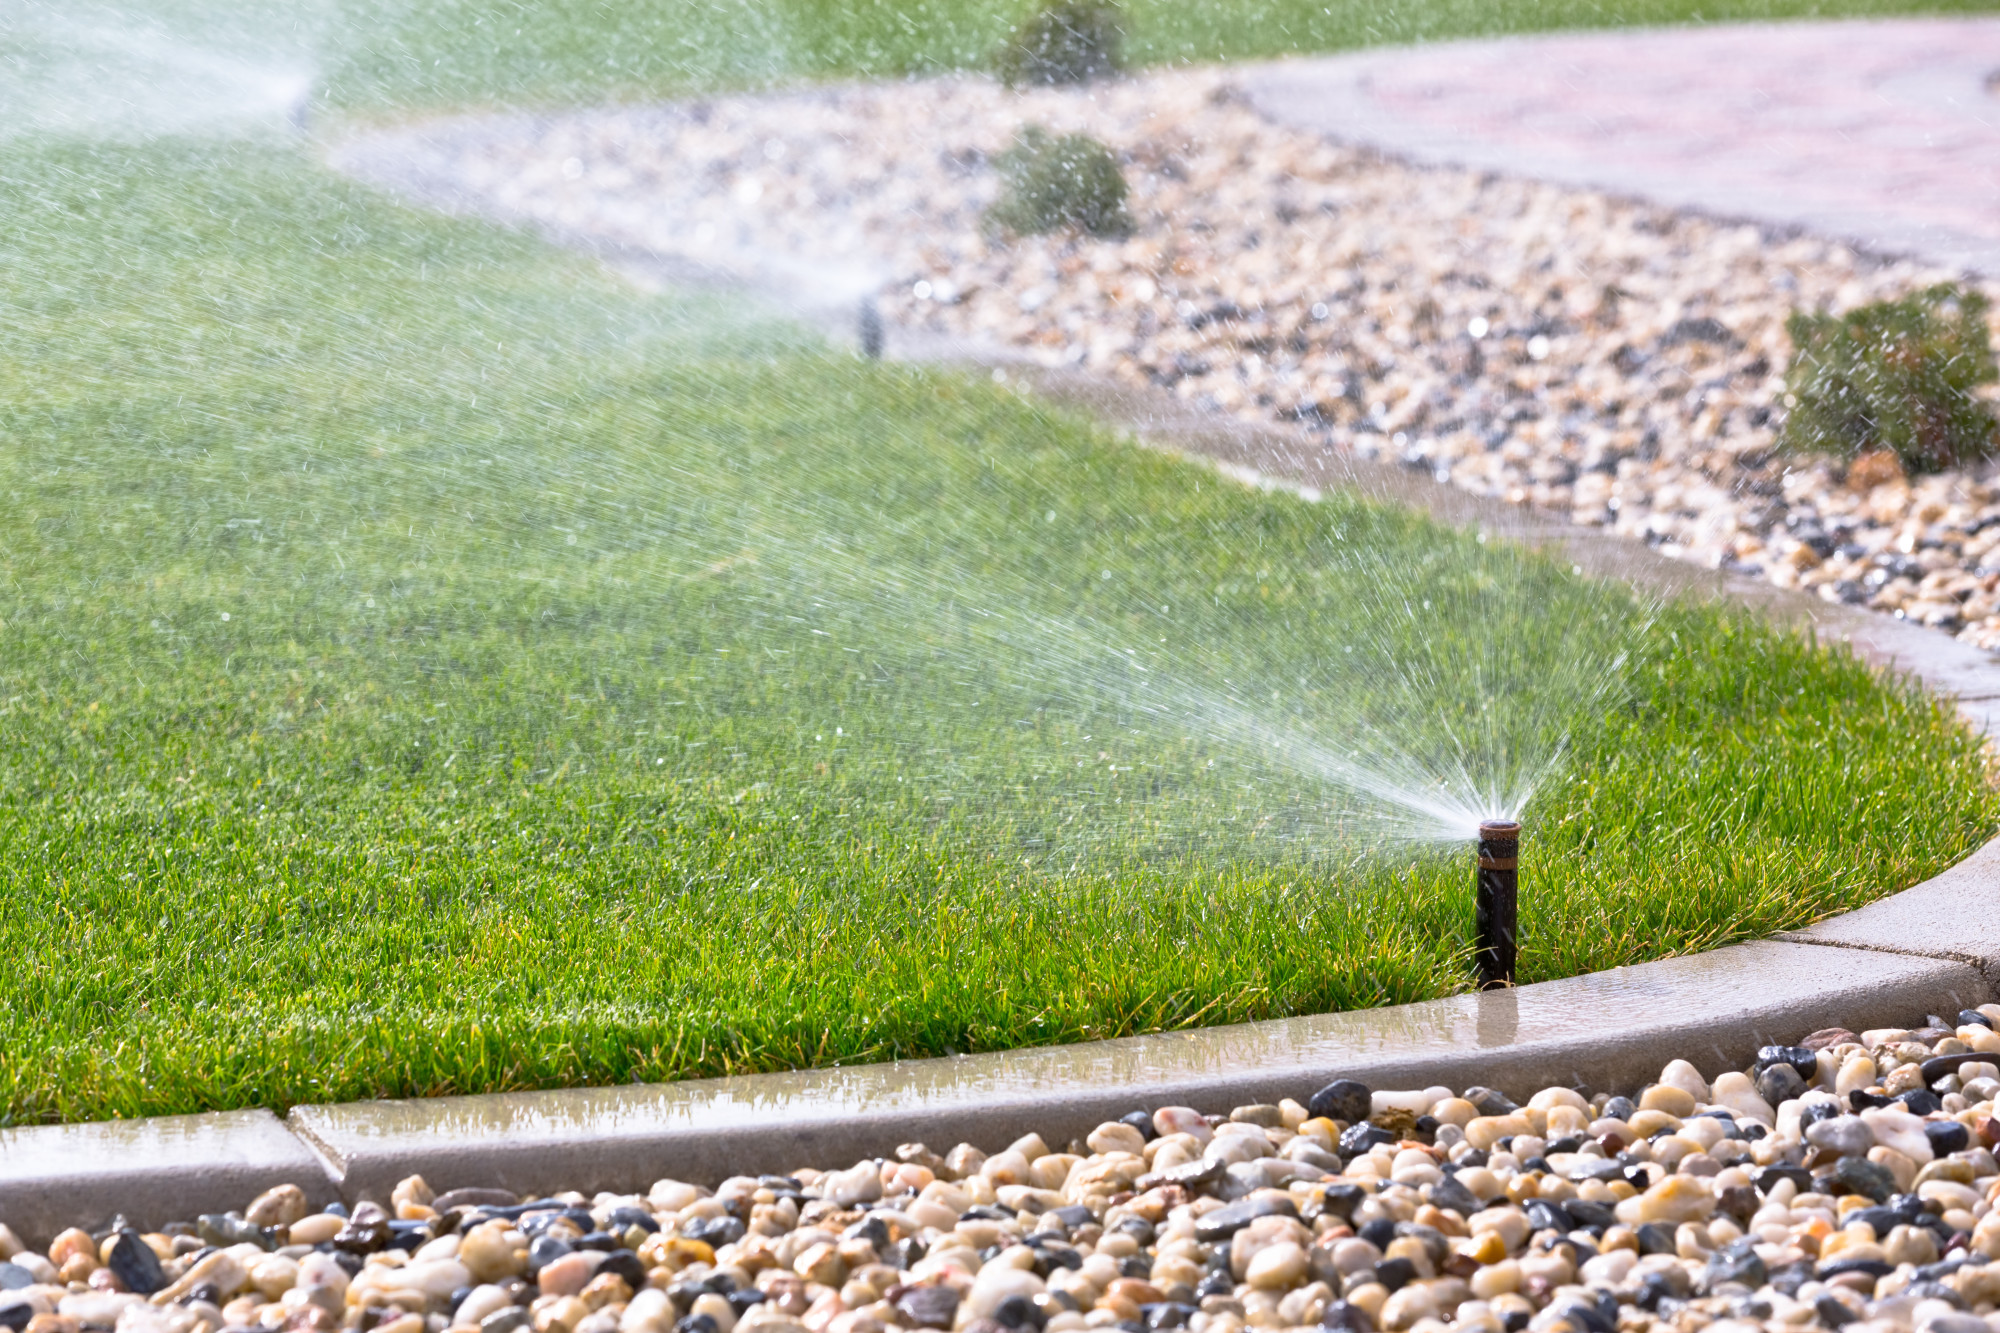 Lawn Maintenance: Is Your Irrigation System Ready for Spring?